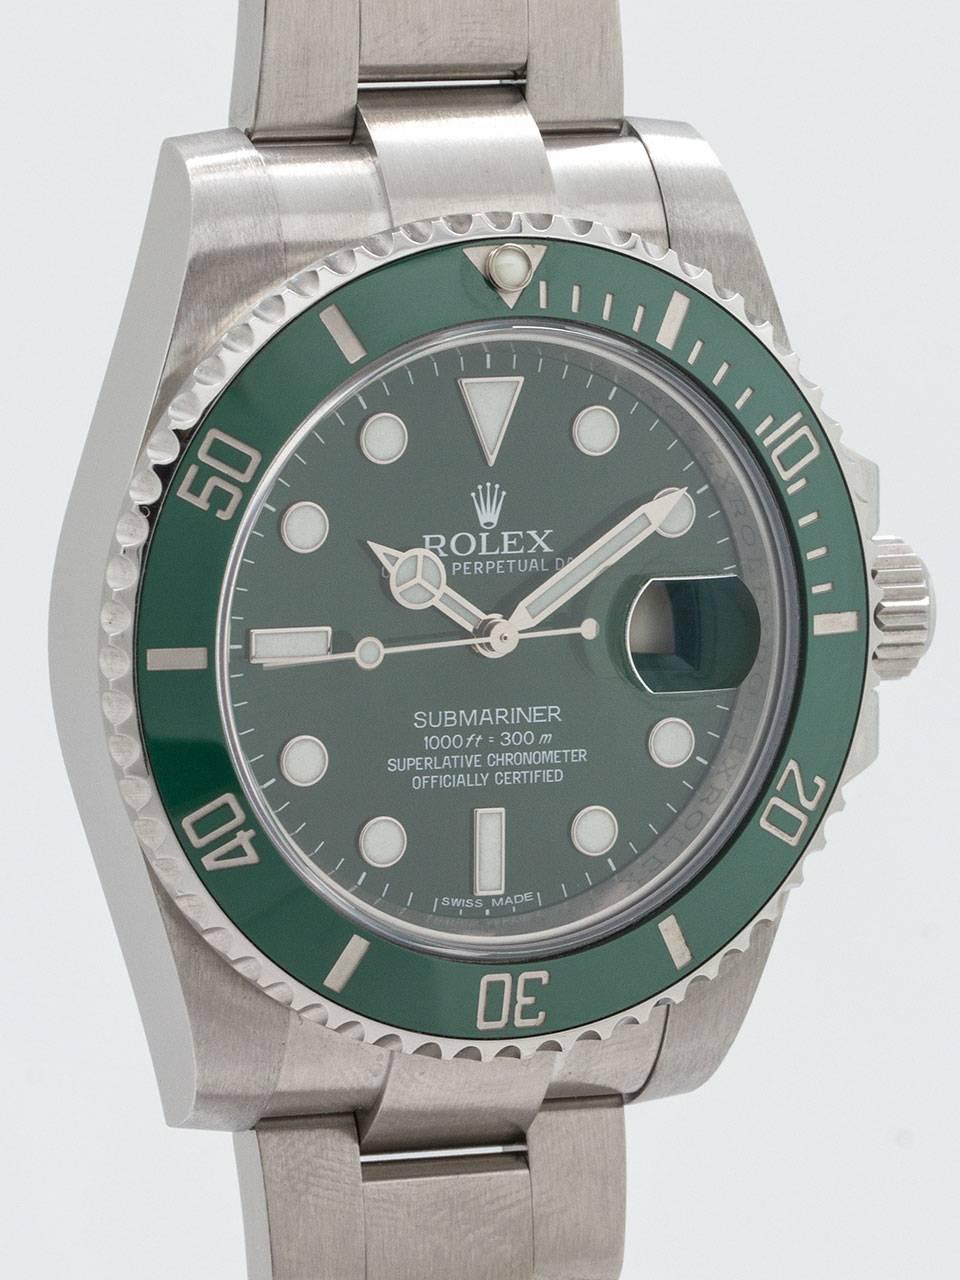 Extremely popular Rolex Submariner “The Hulk” ref 116610 LV, random serial number series, circa 2010s. Featuring 42mm diameter stainless steel case with unidirectional elapsed time green ceramic bezel and sapphire crystal. Oyster case with signed